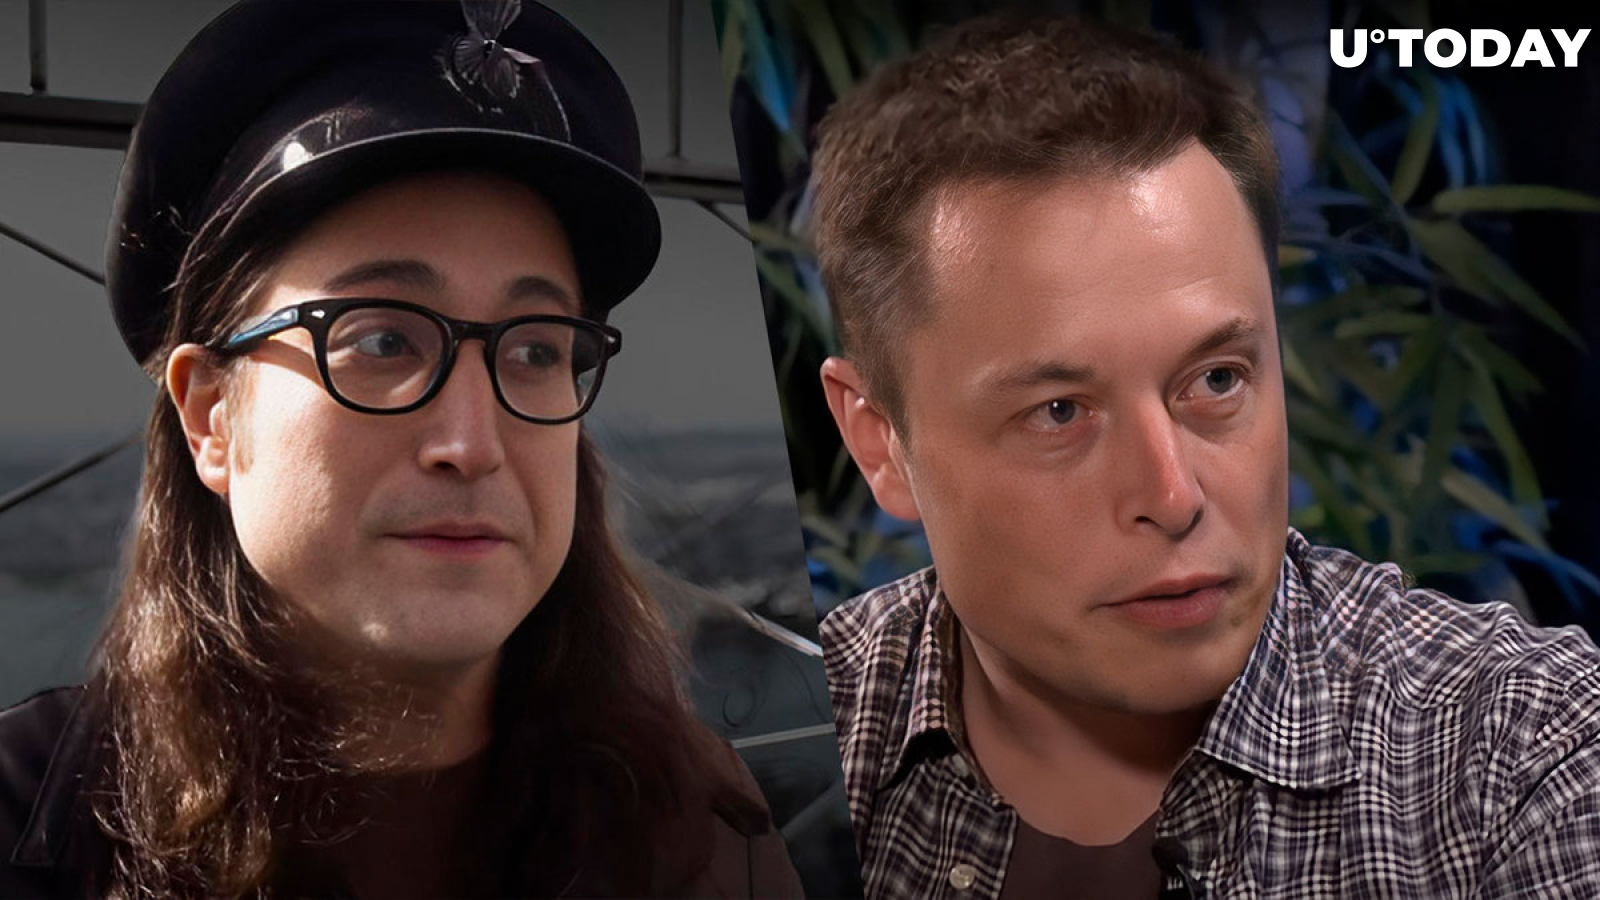 Elon Musk's Key Reality Statement Argued by John Lennon's Son, Here’s What’s Important